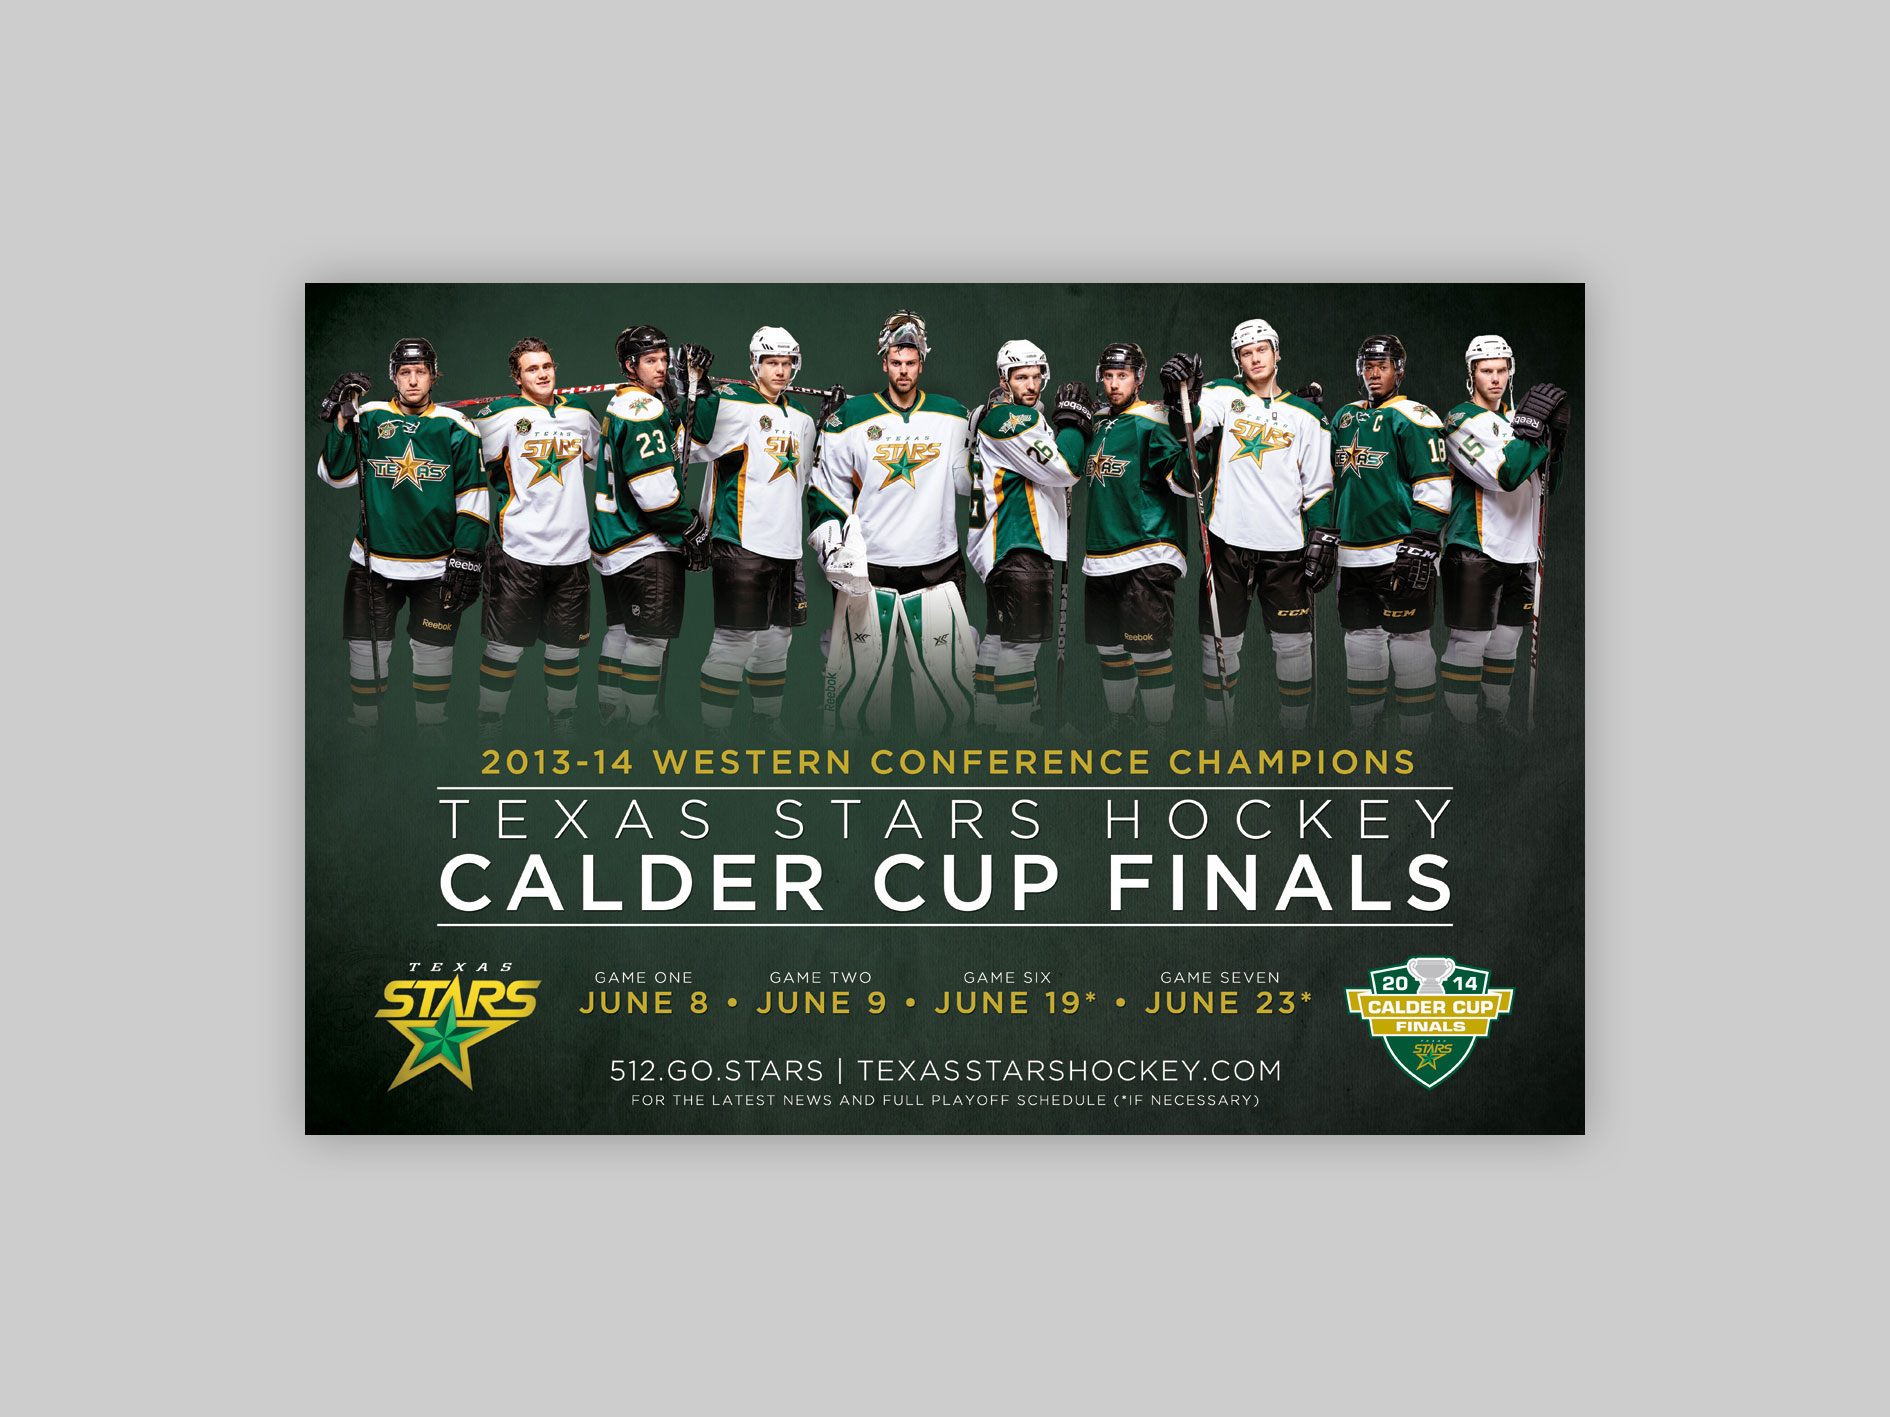  All Over Media poster, distributed to advertise the Calder Cup Finals. 